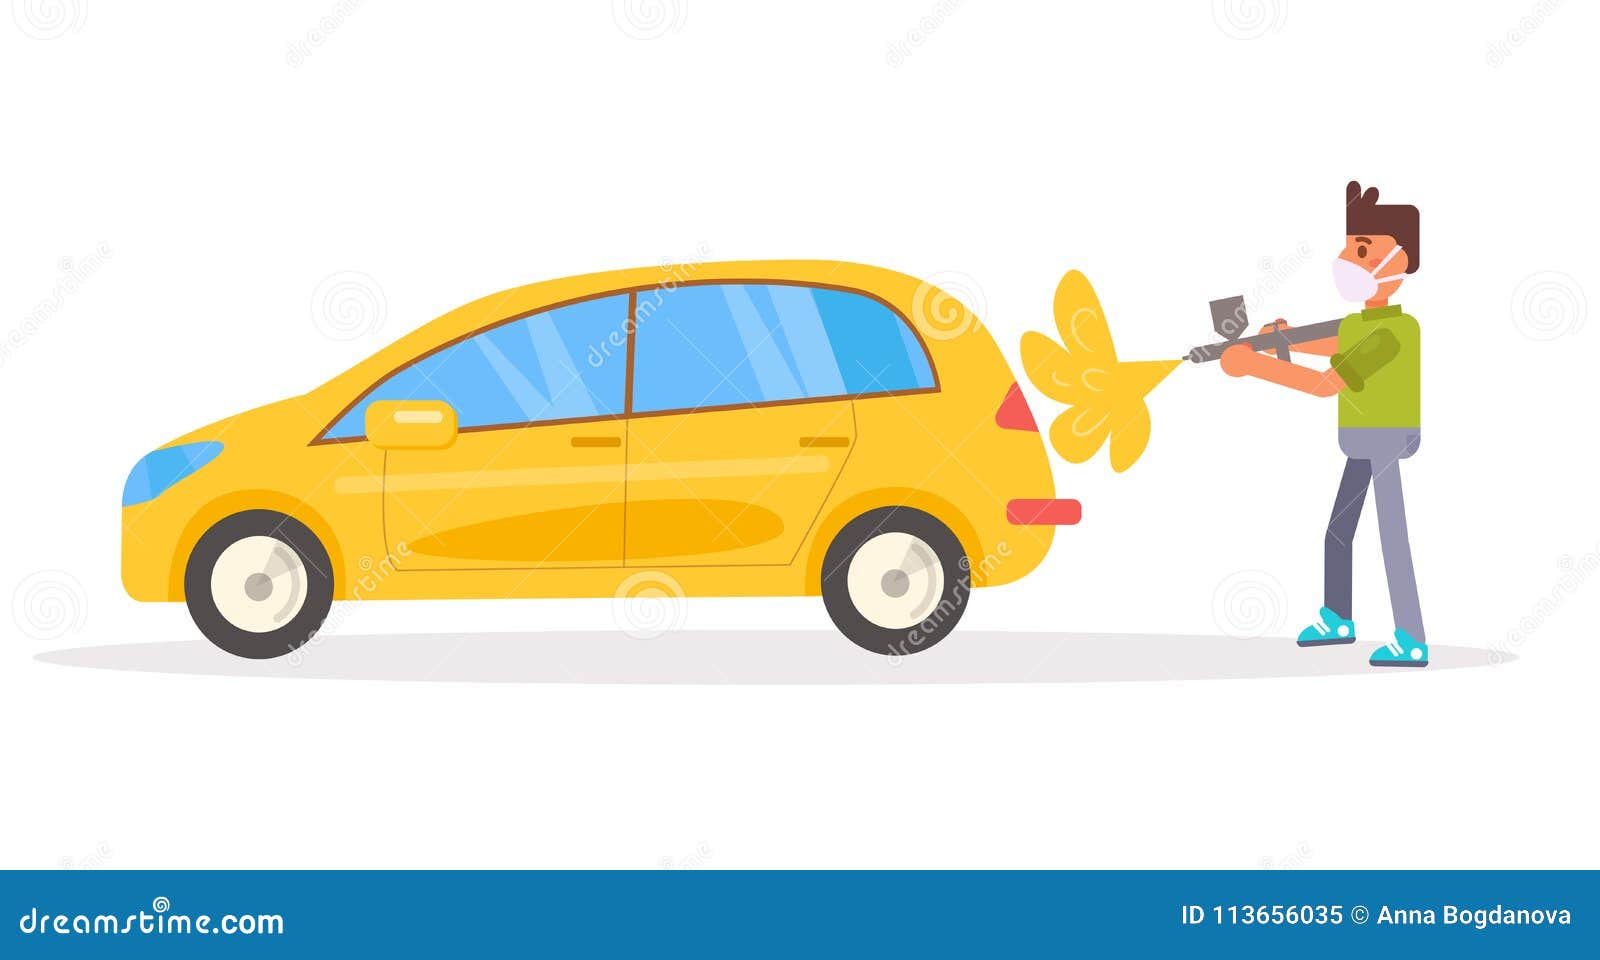 Painting Car . Aerography Vector Stock Vector - Illustration of shop,  graphic: 113656035